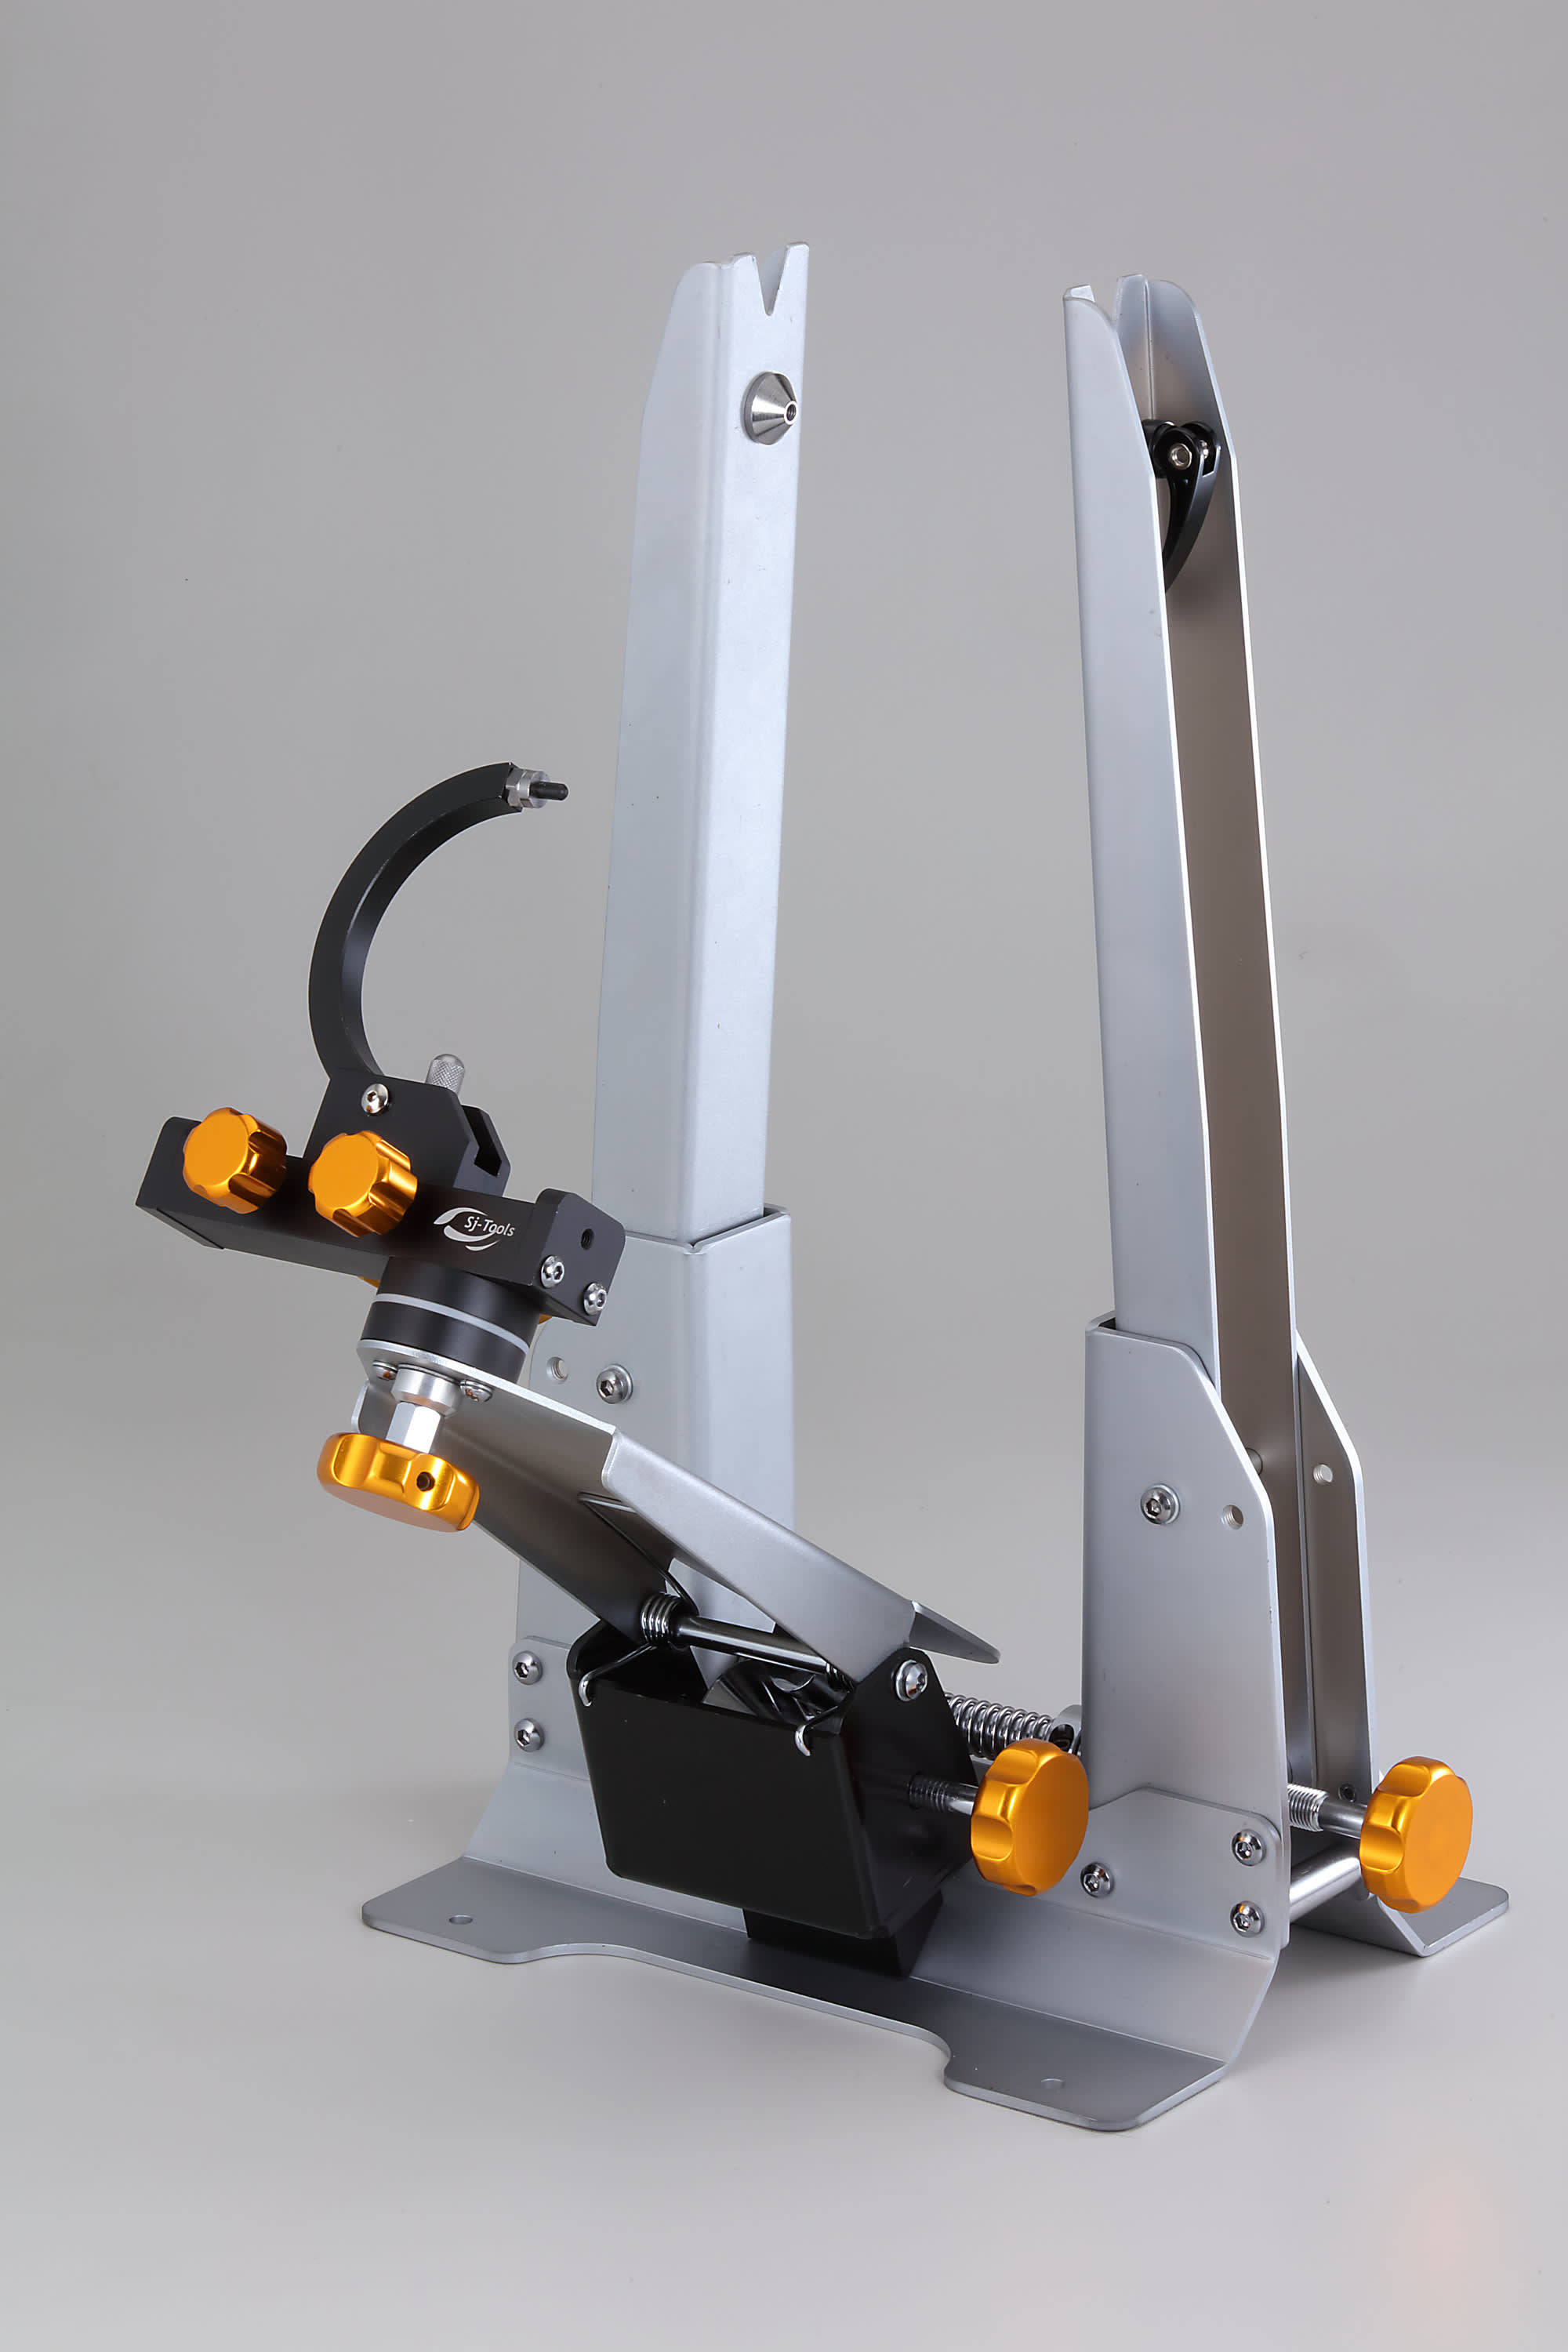 TAIPEI CYCLE d&i awards 2023 Winner: Utility model multifunctional wheel truing stand